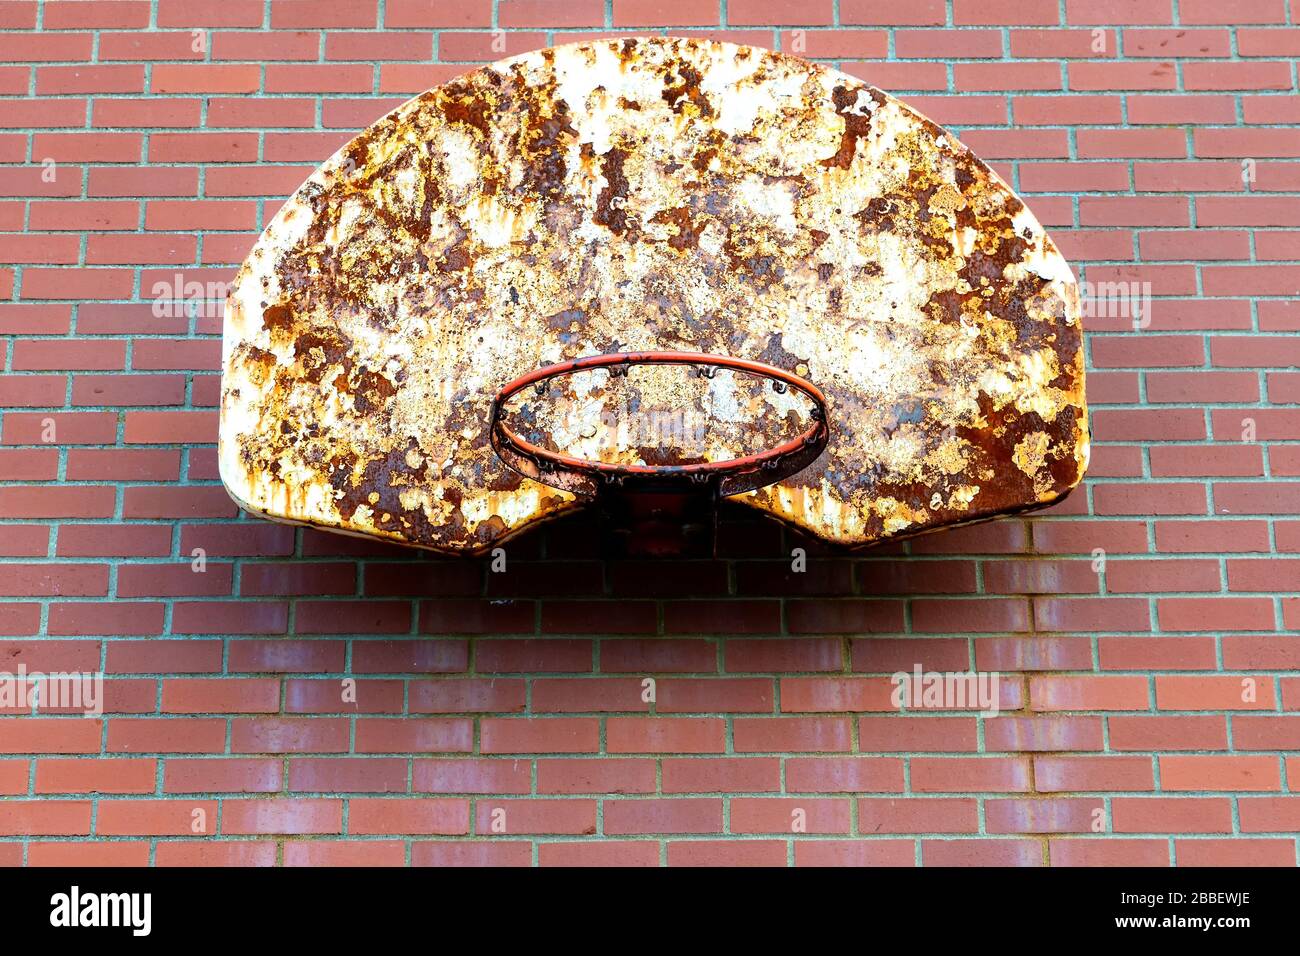 An old basketball hoop mounted outdoors on a brick wall. The netting is gone, and the backboard is dirty and rusty. Room for text. Stock Photo